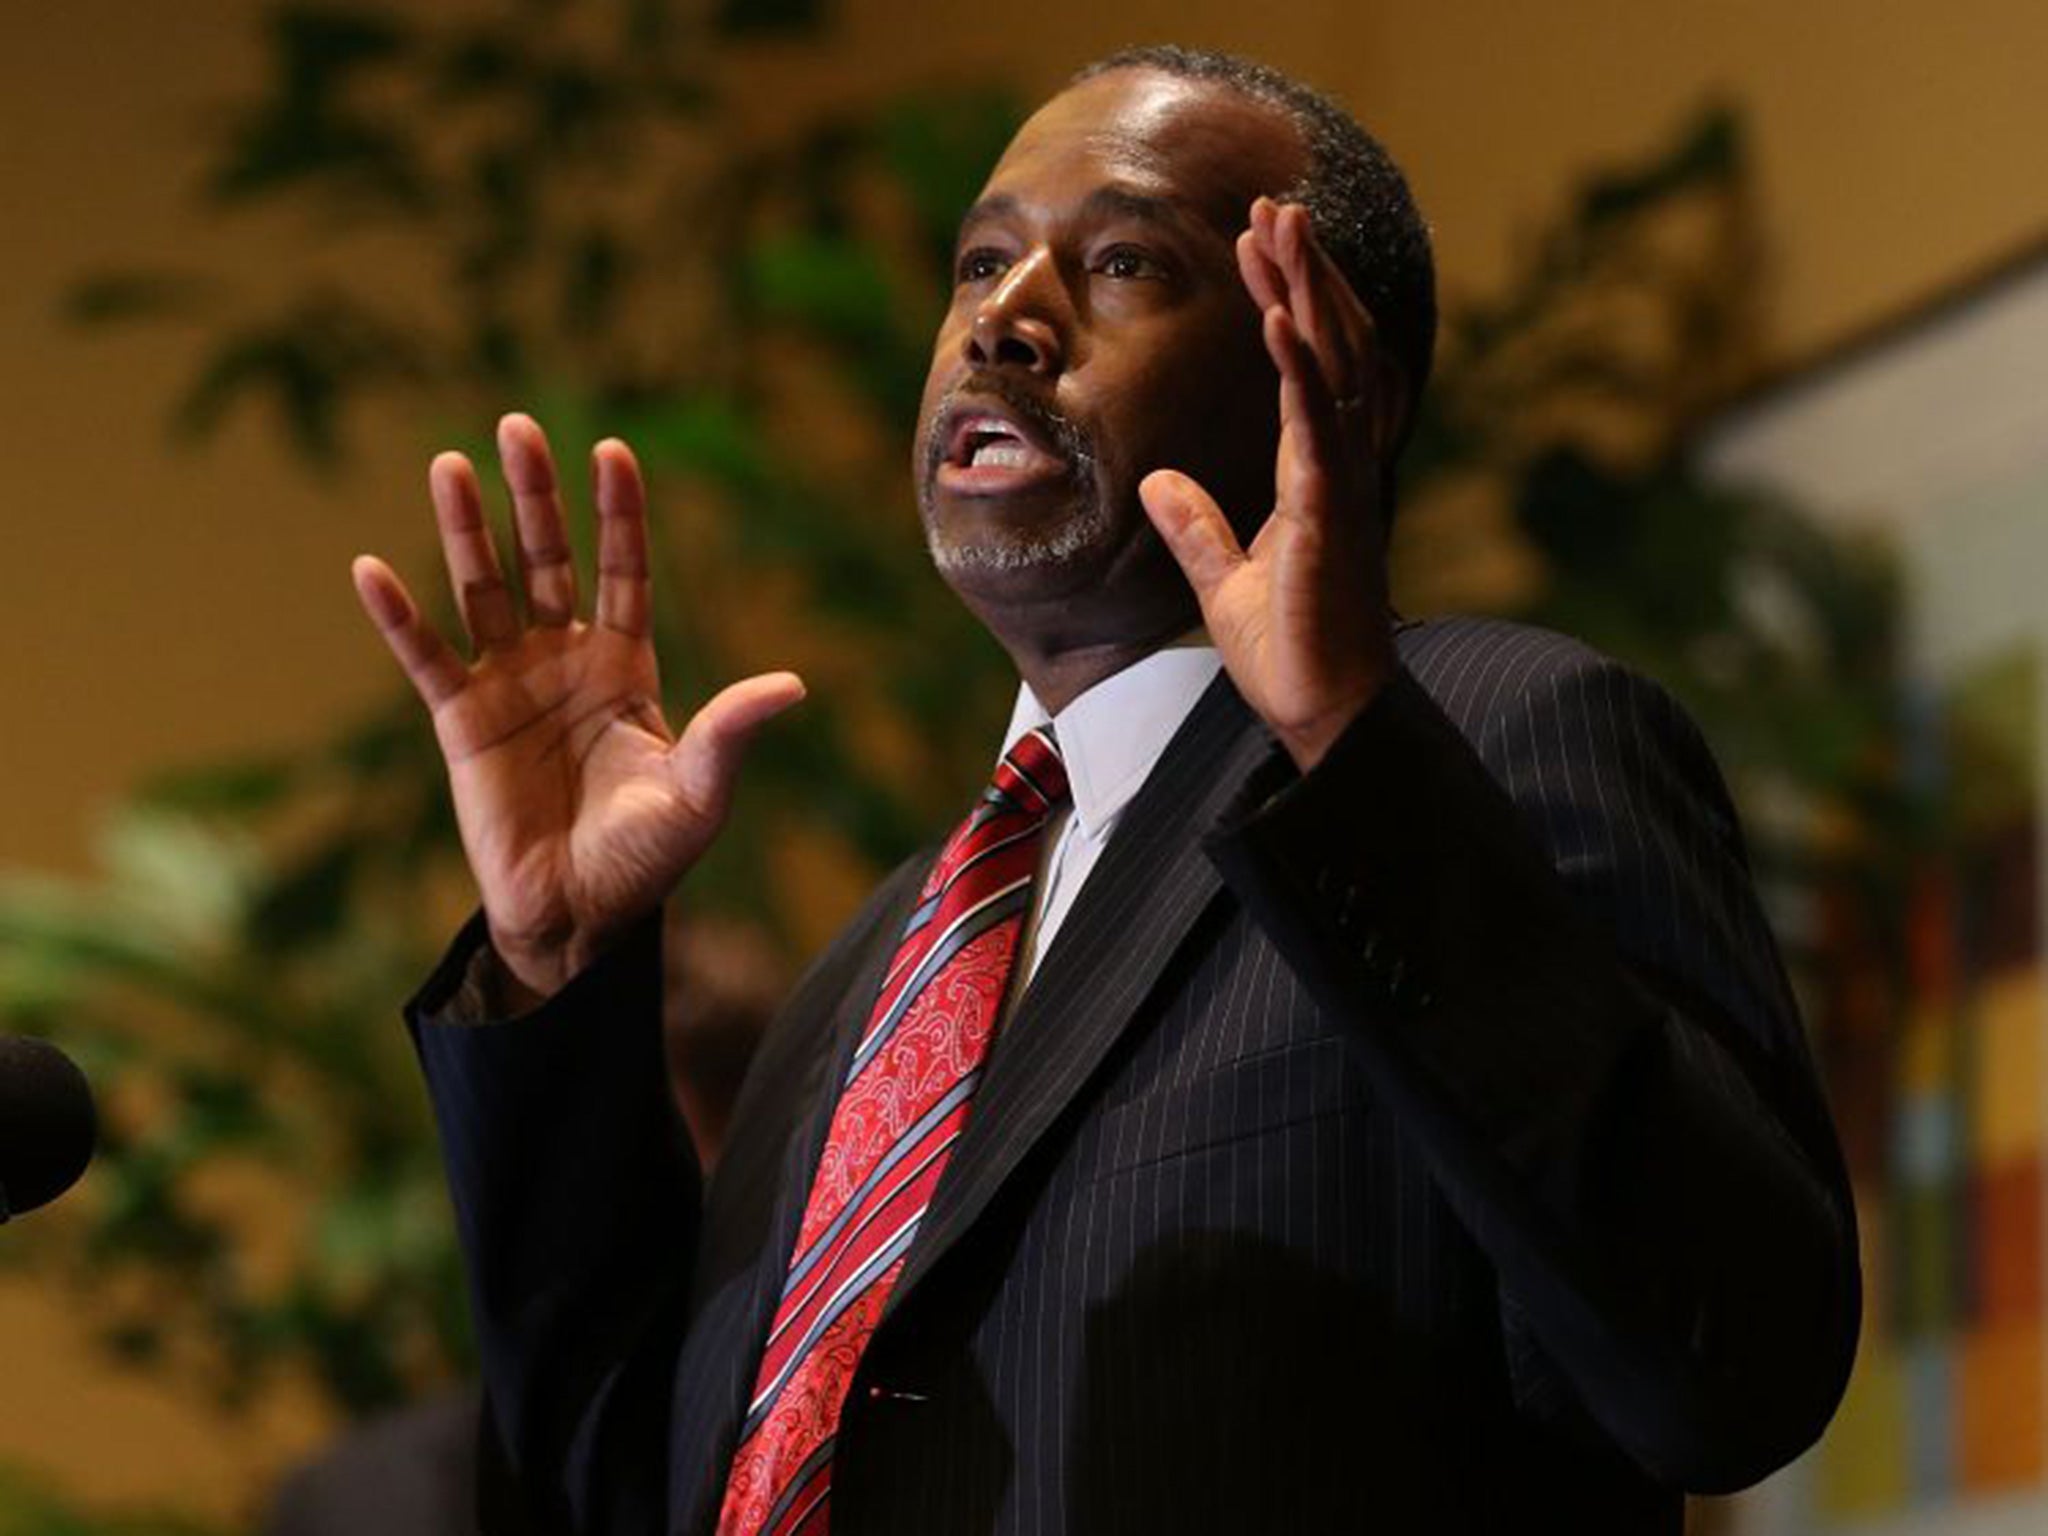 Republican candidate Ben Carson said that respected advocacy center has links to terrorism